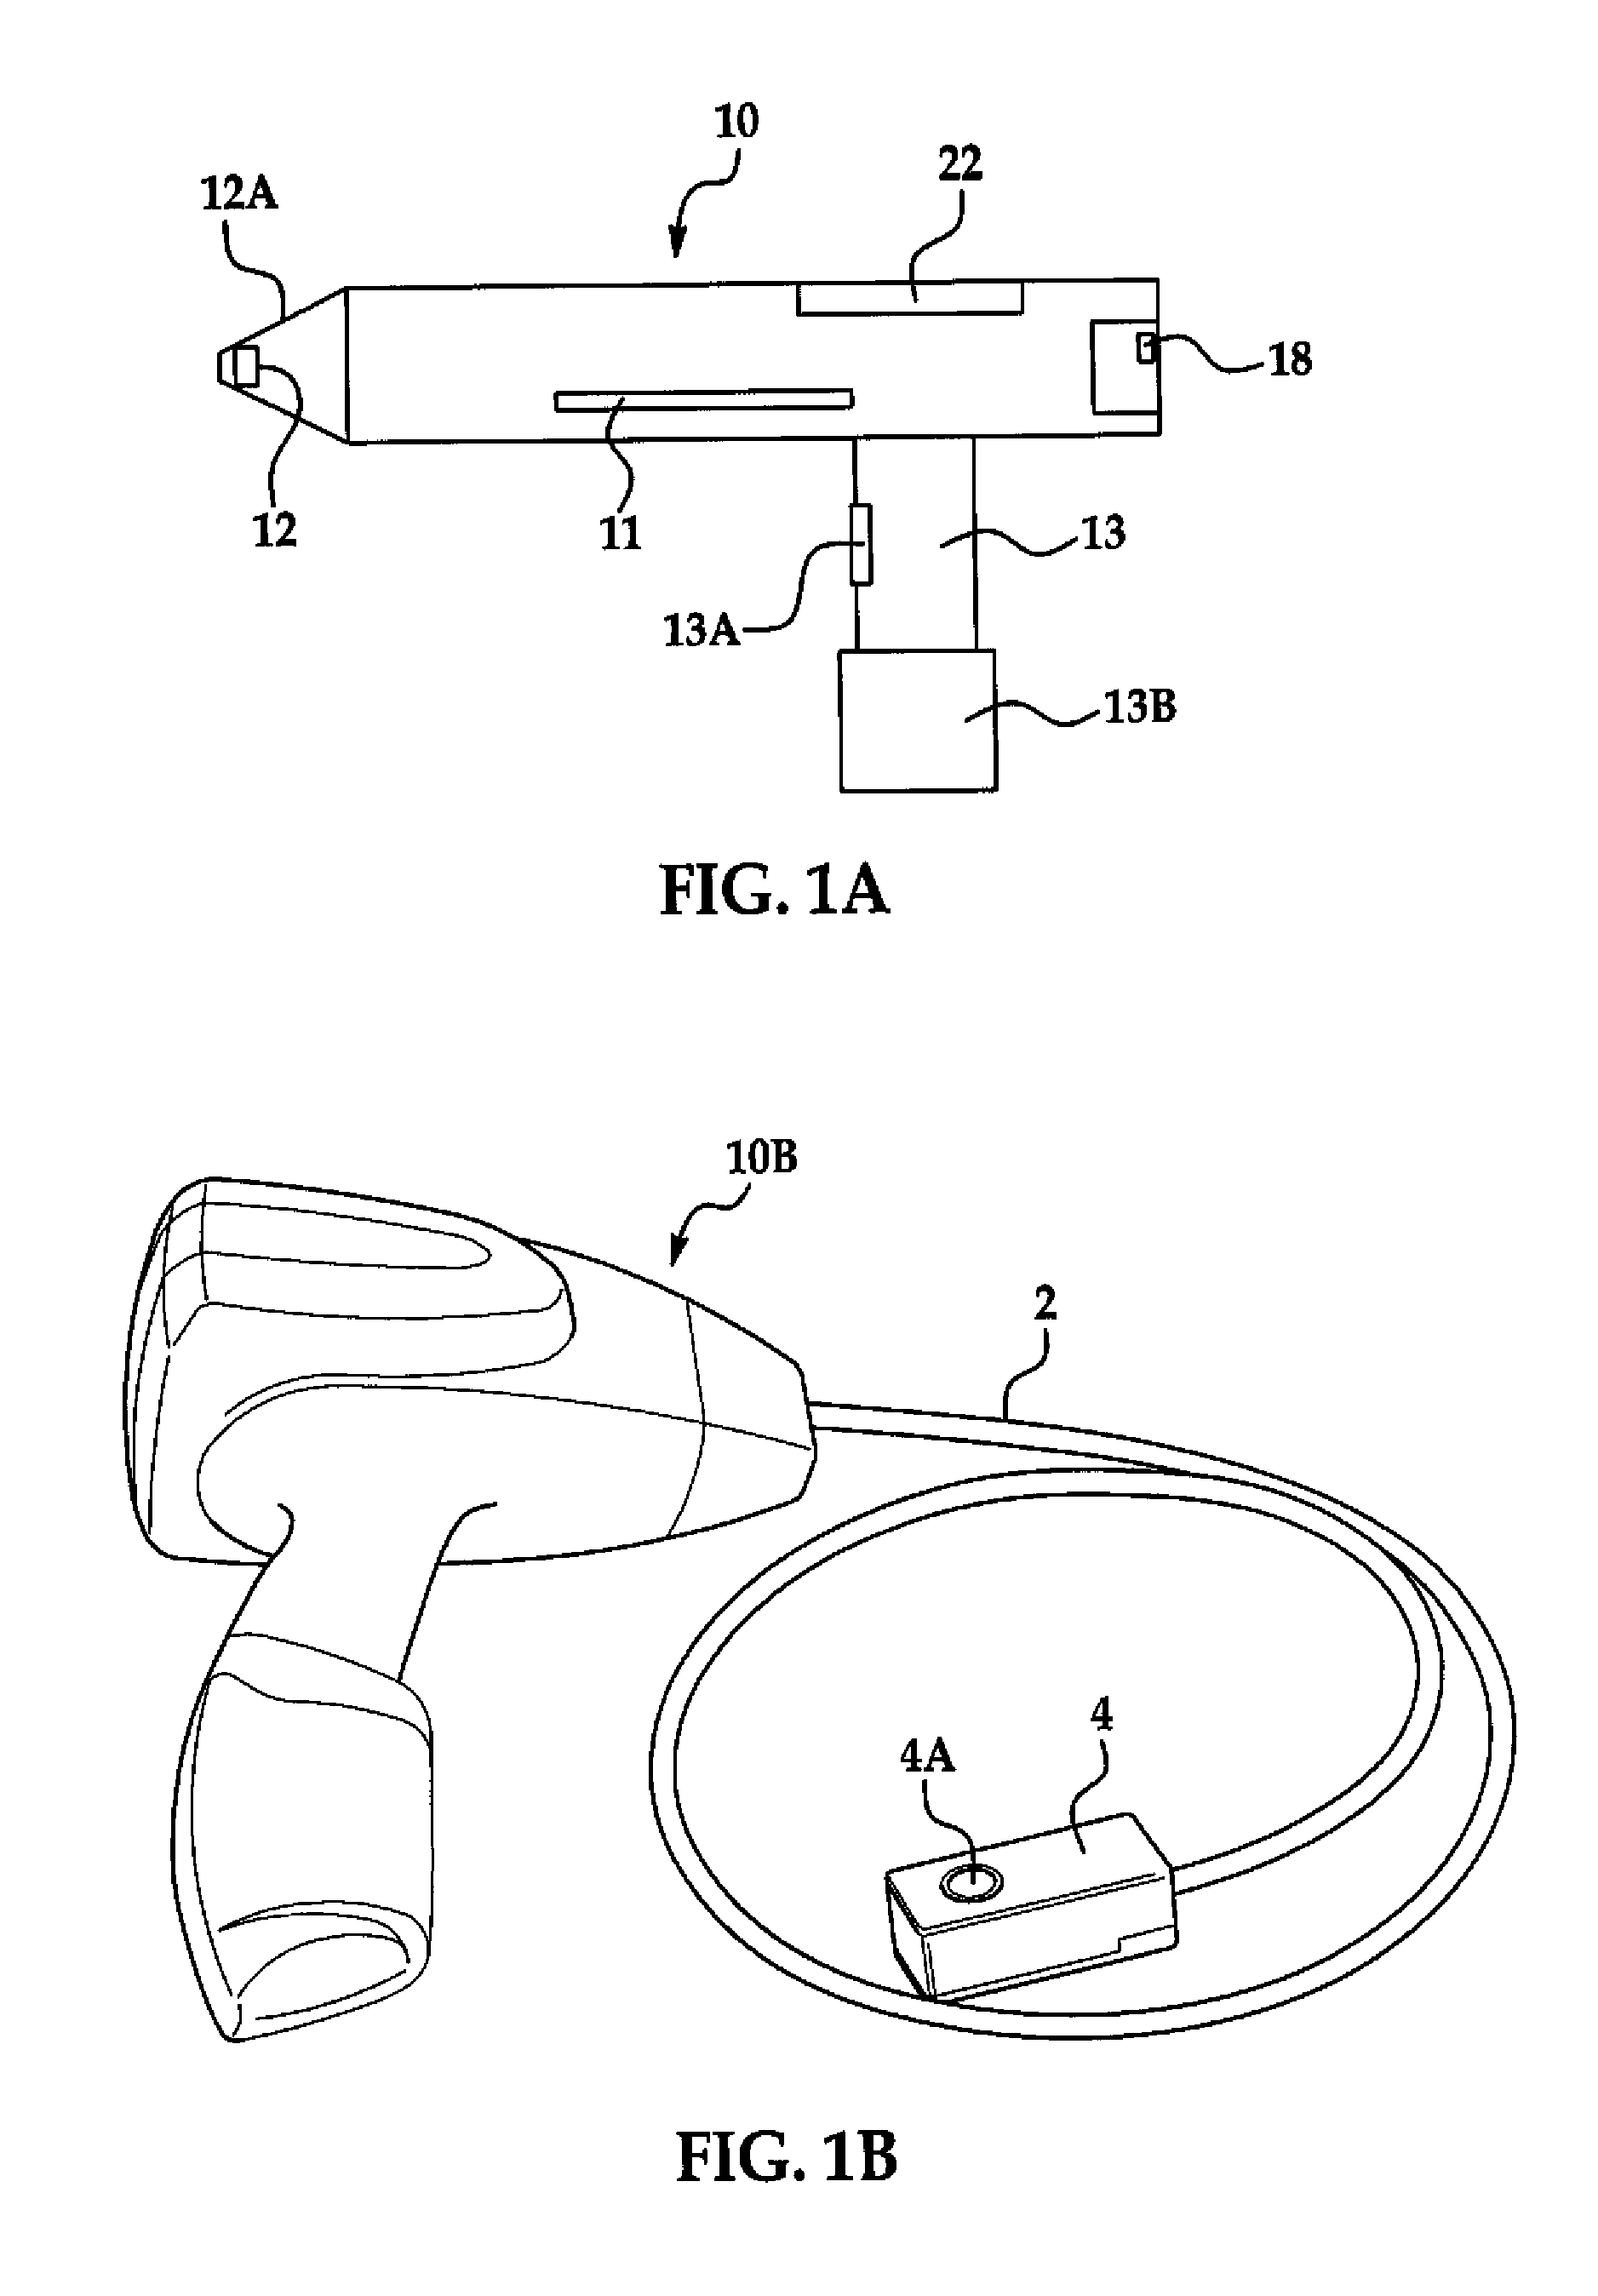 Method for performing ir spectroscopy measurements to determine film coating thickness on a substrate